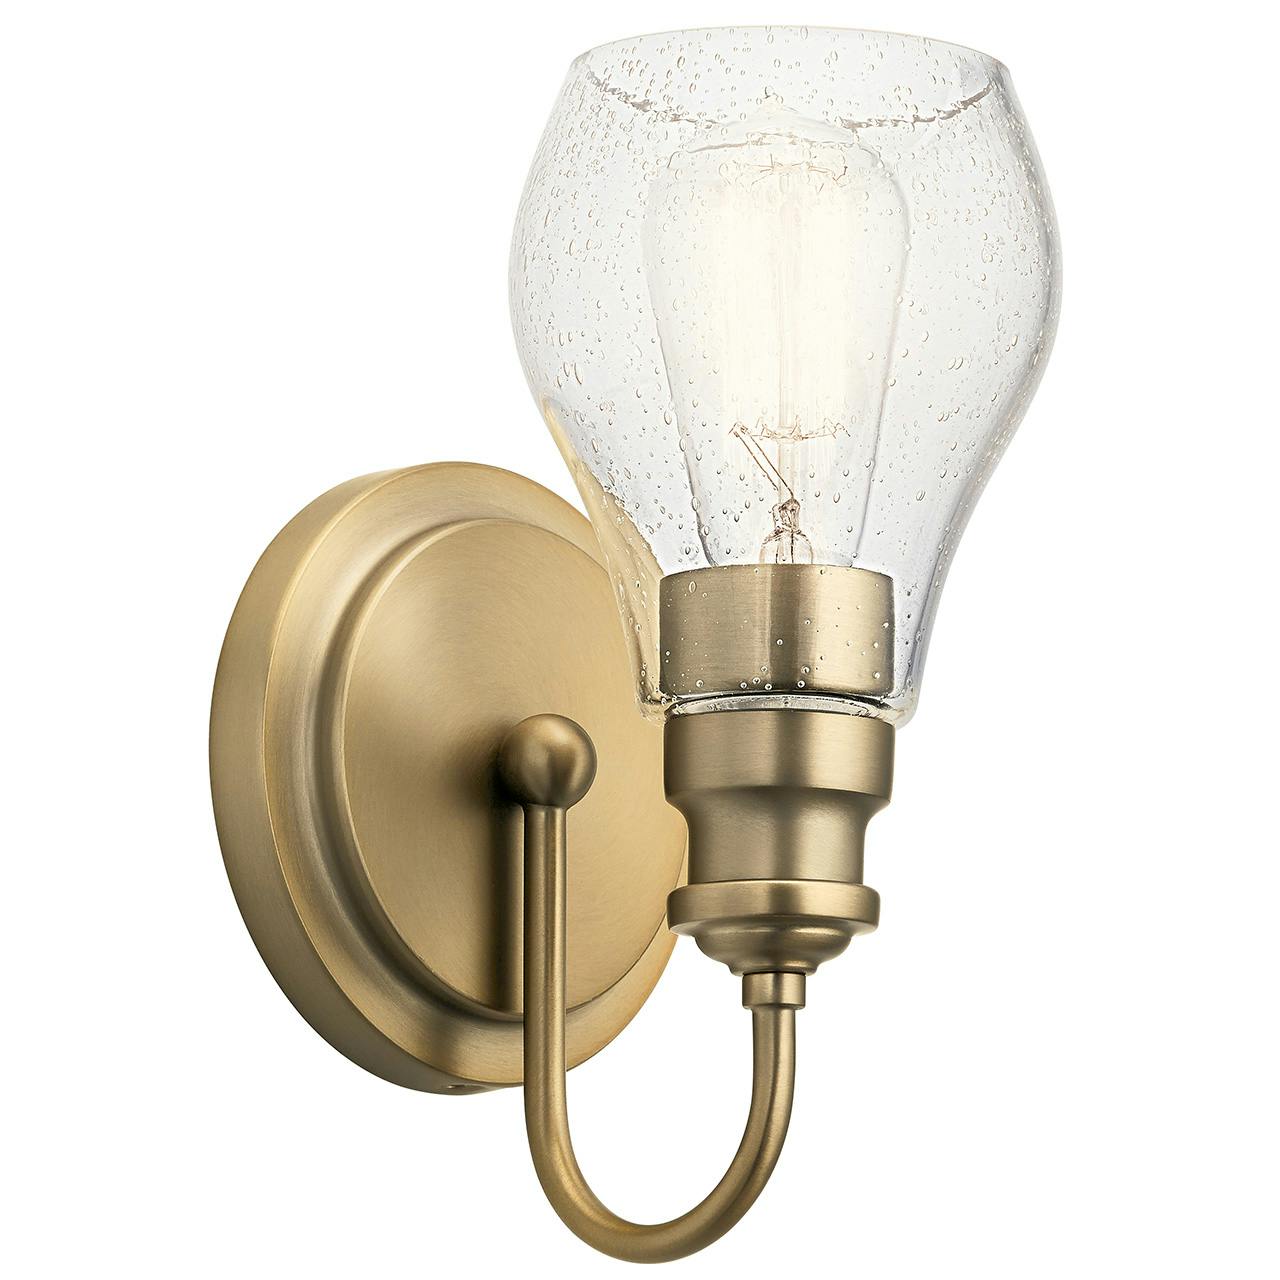 Greenbrier 1 Light Sconce Classic Bronze on a white background